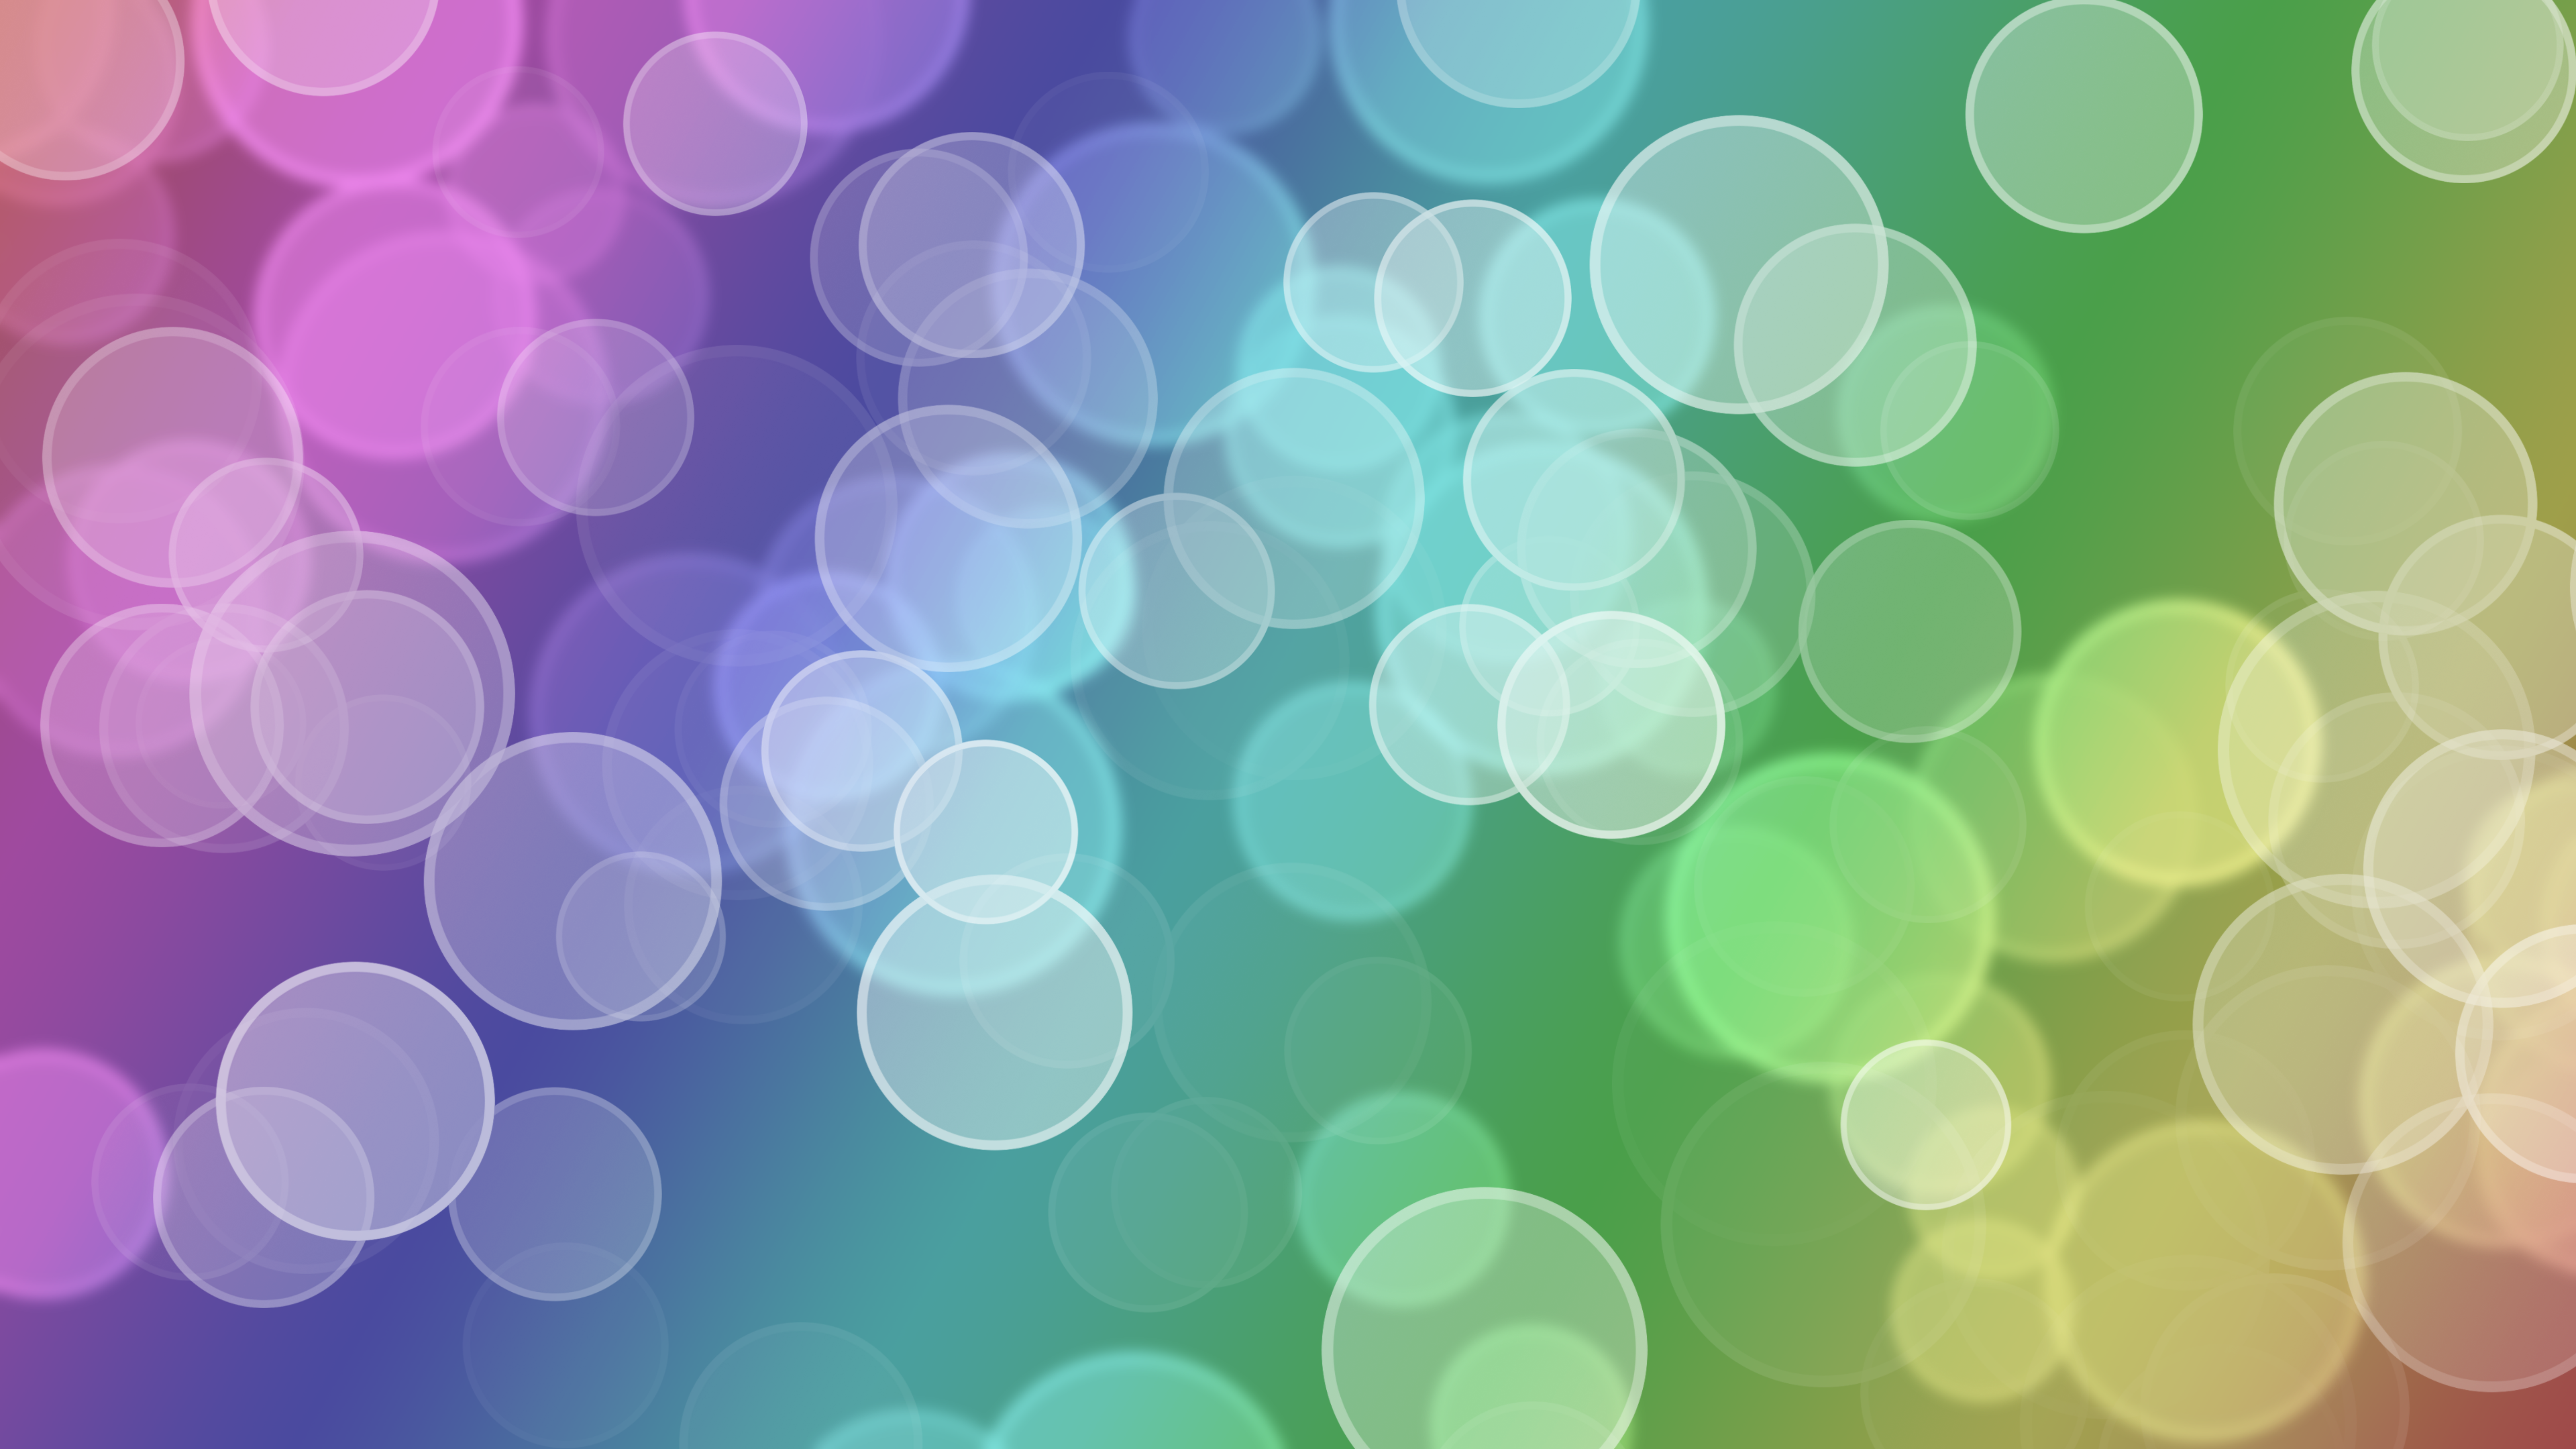 Free Bubble Wallpapers Download 